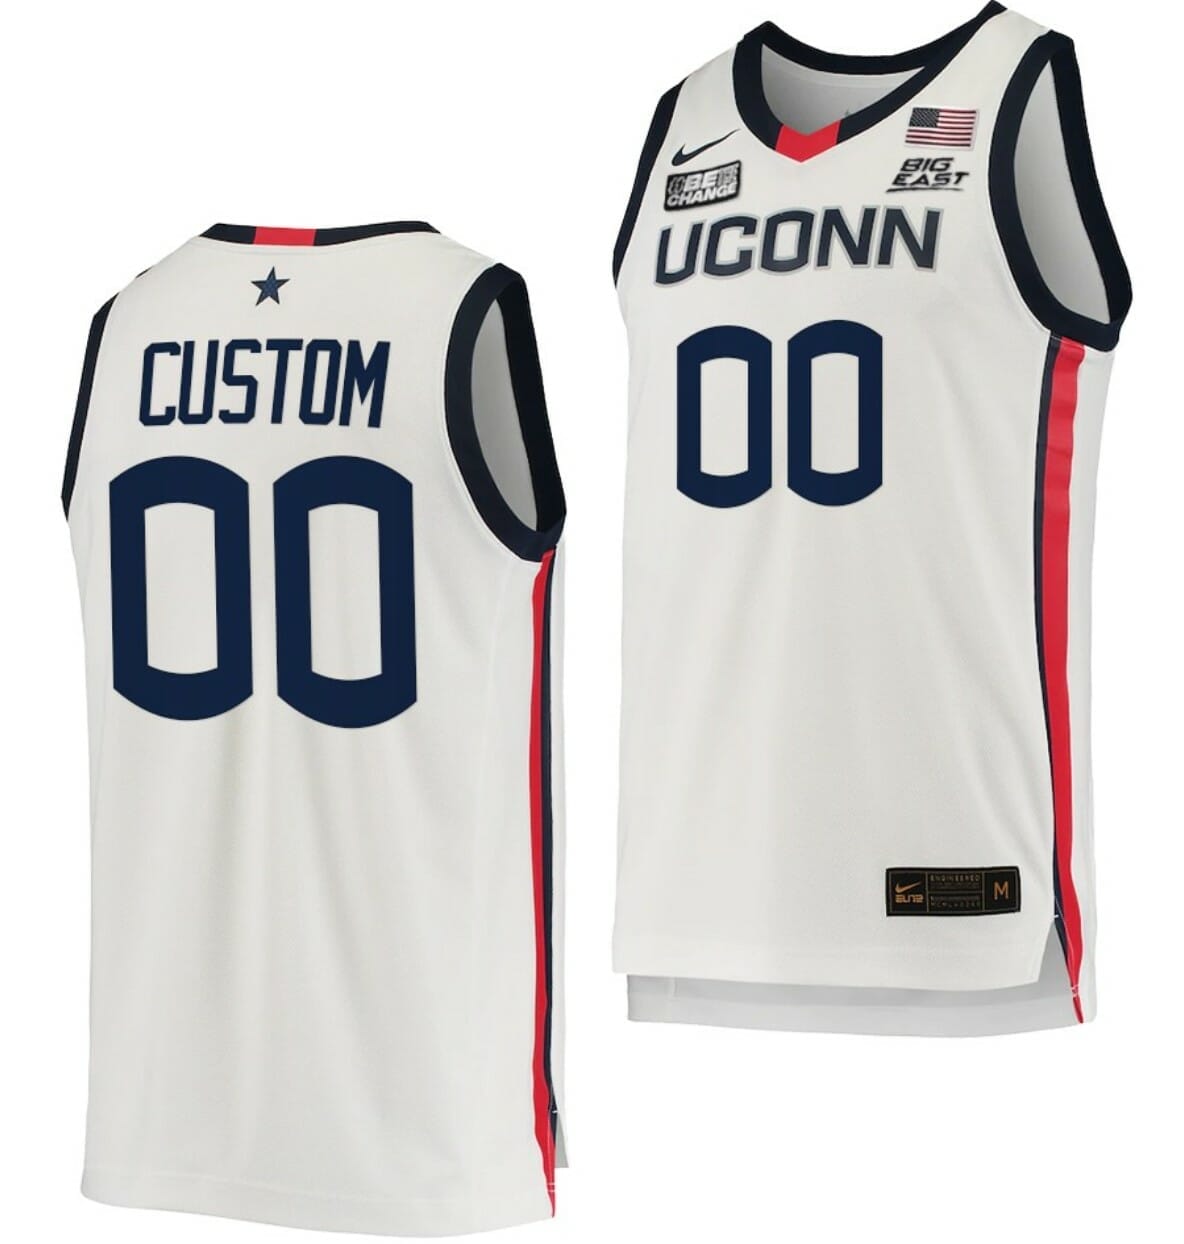 customize nba jersey with your name